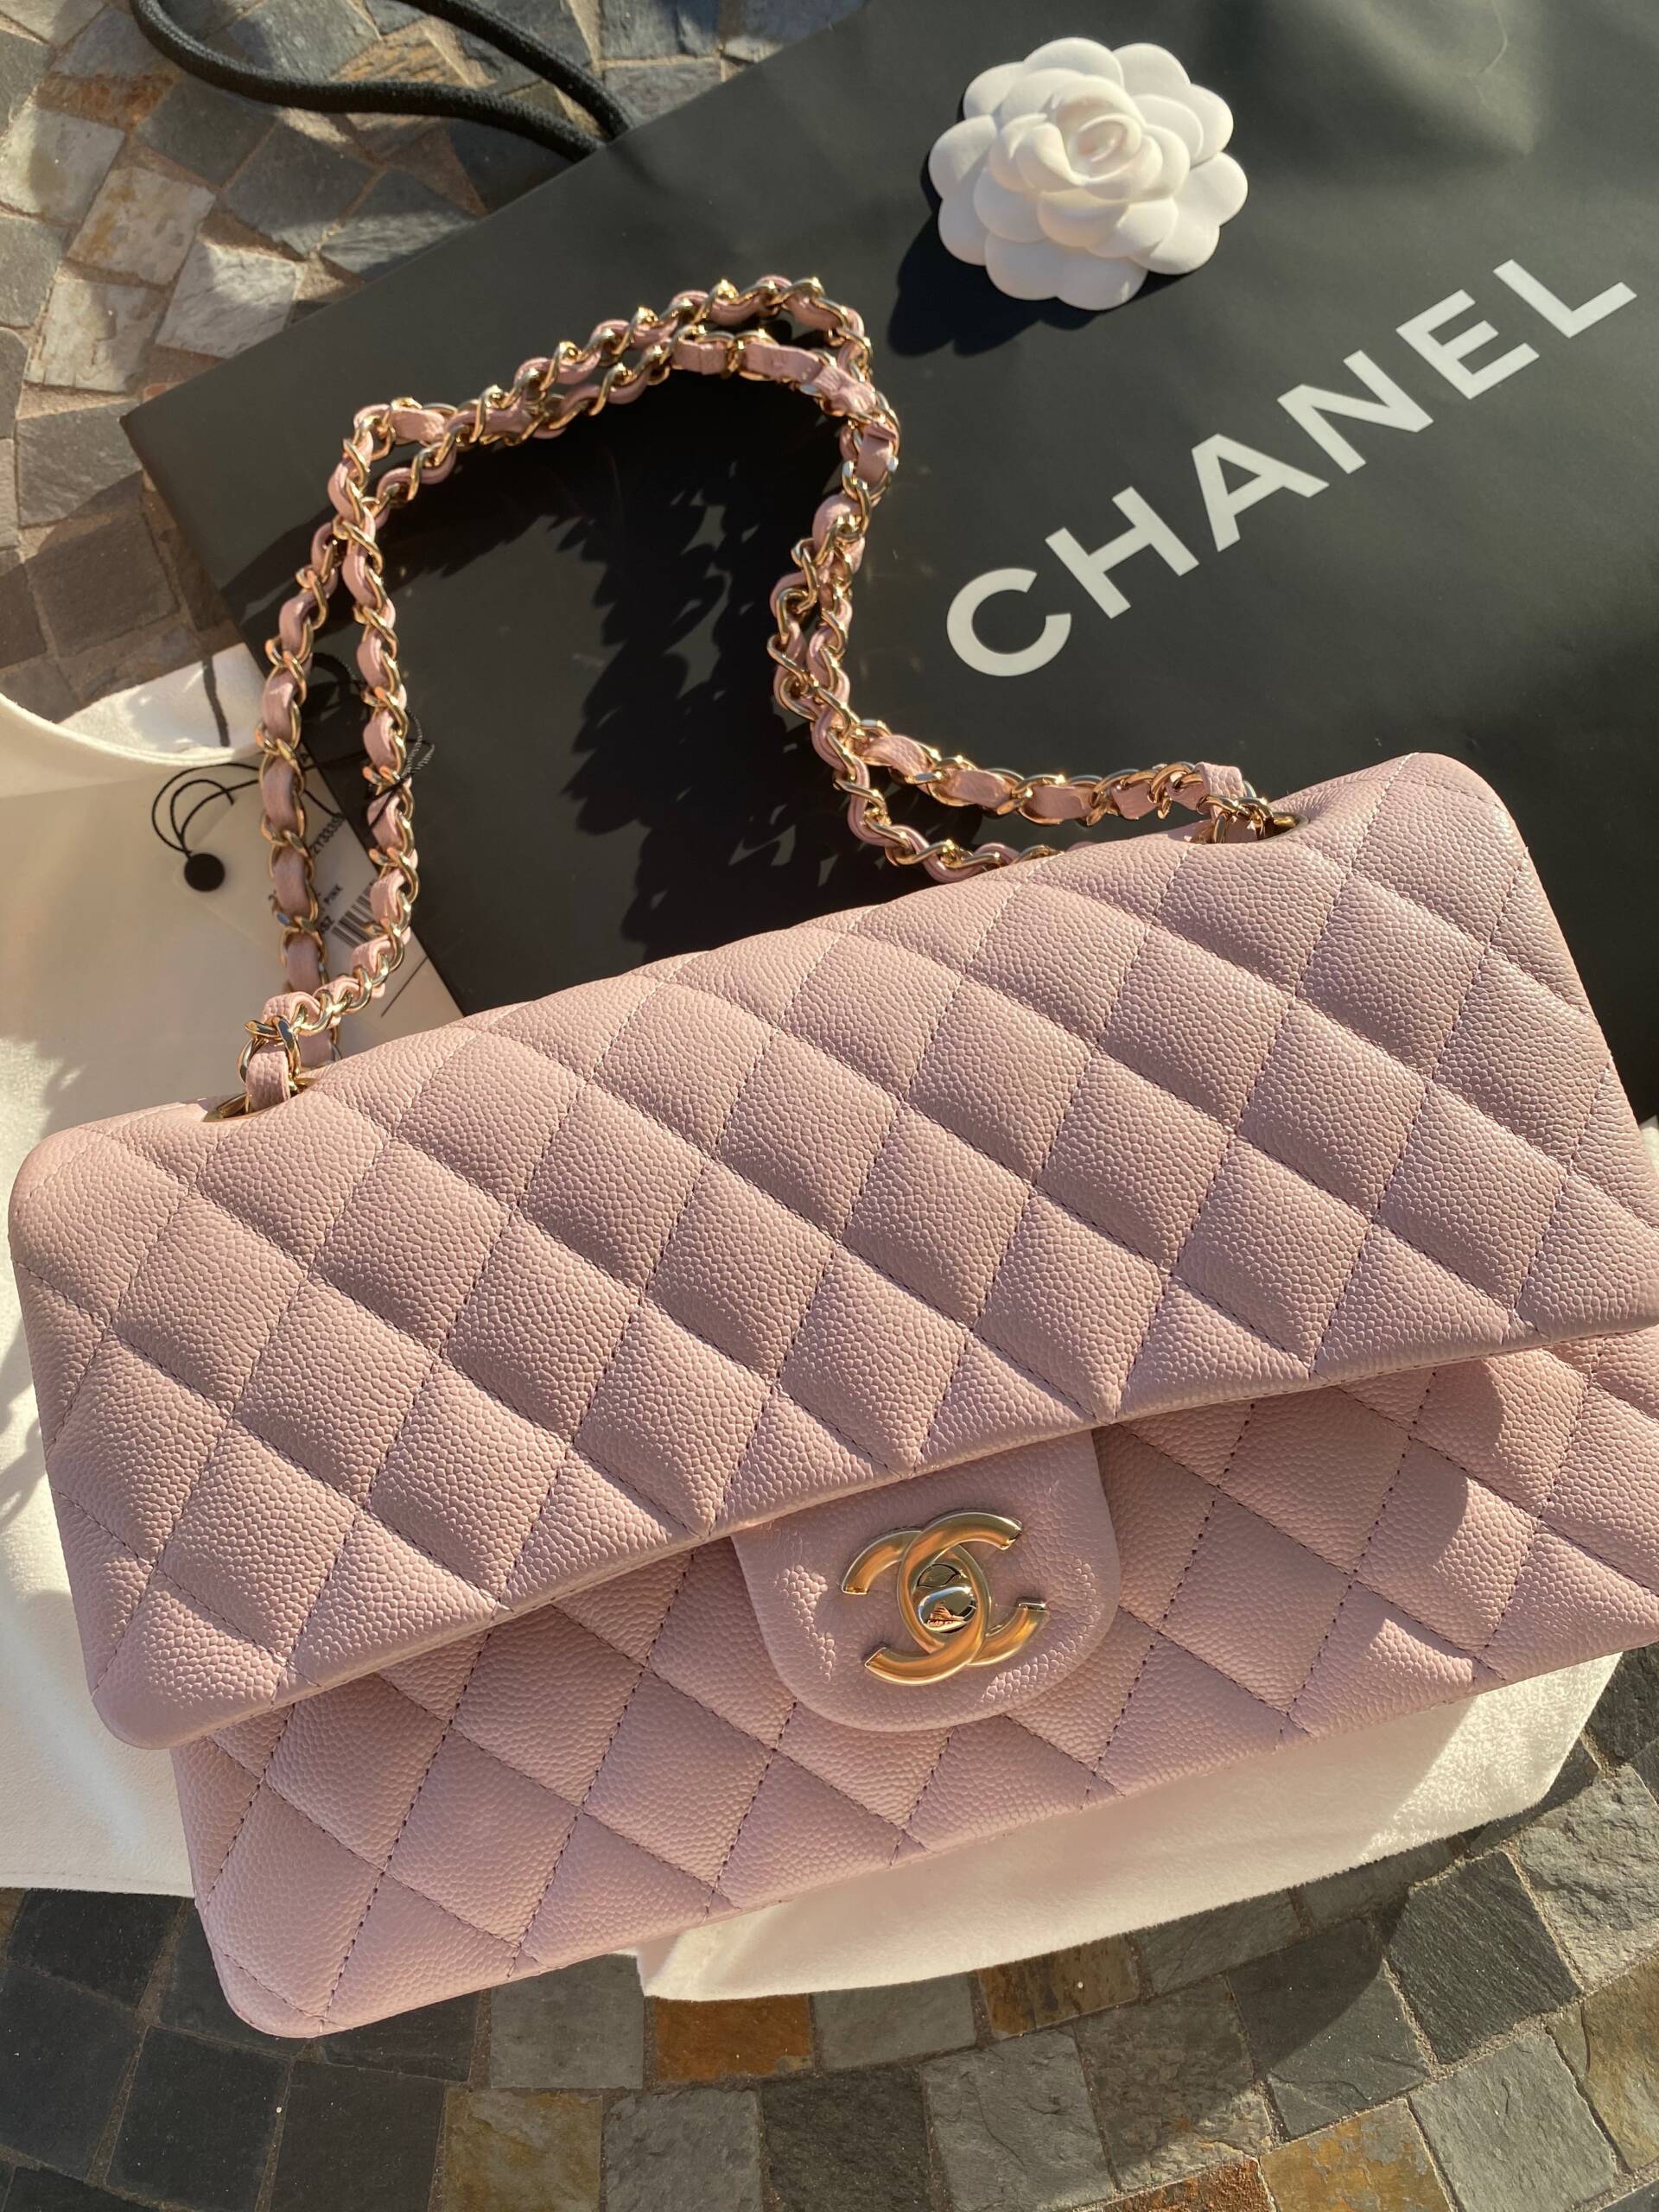 CHANEL MEDIUM/LARGE CLASSIC FLAP REVIEW, WEAR & TEAR, WHAT FITS